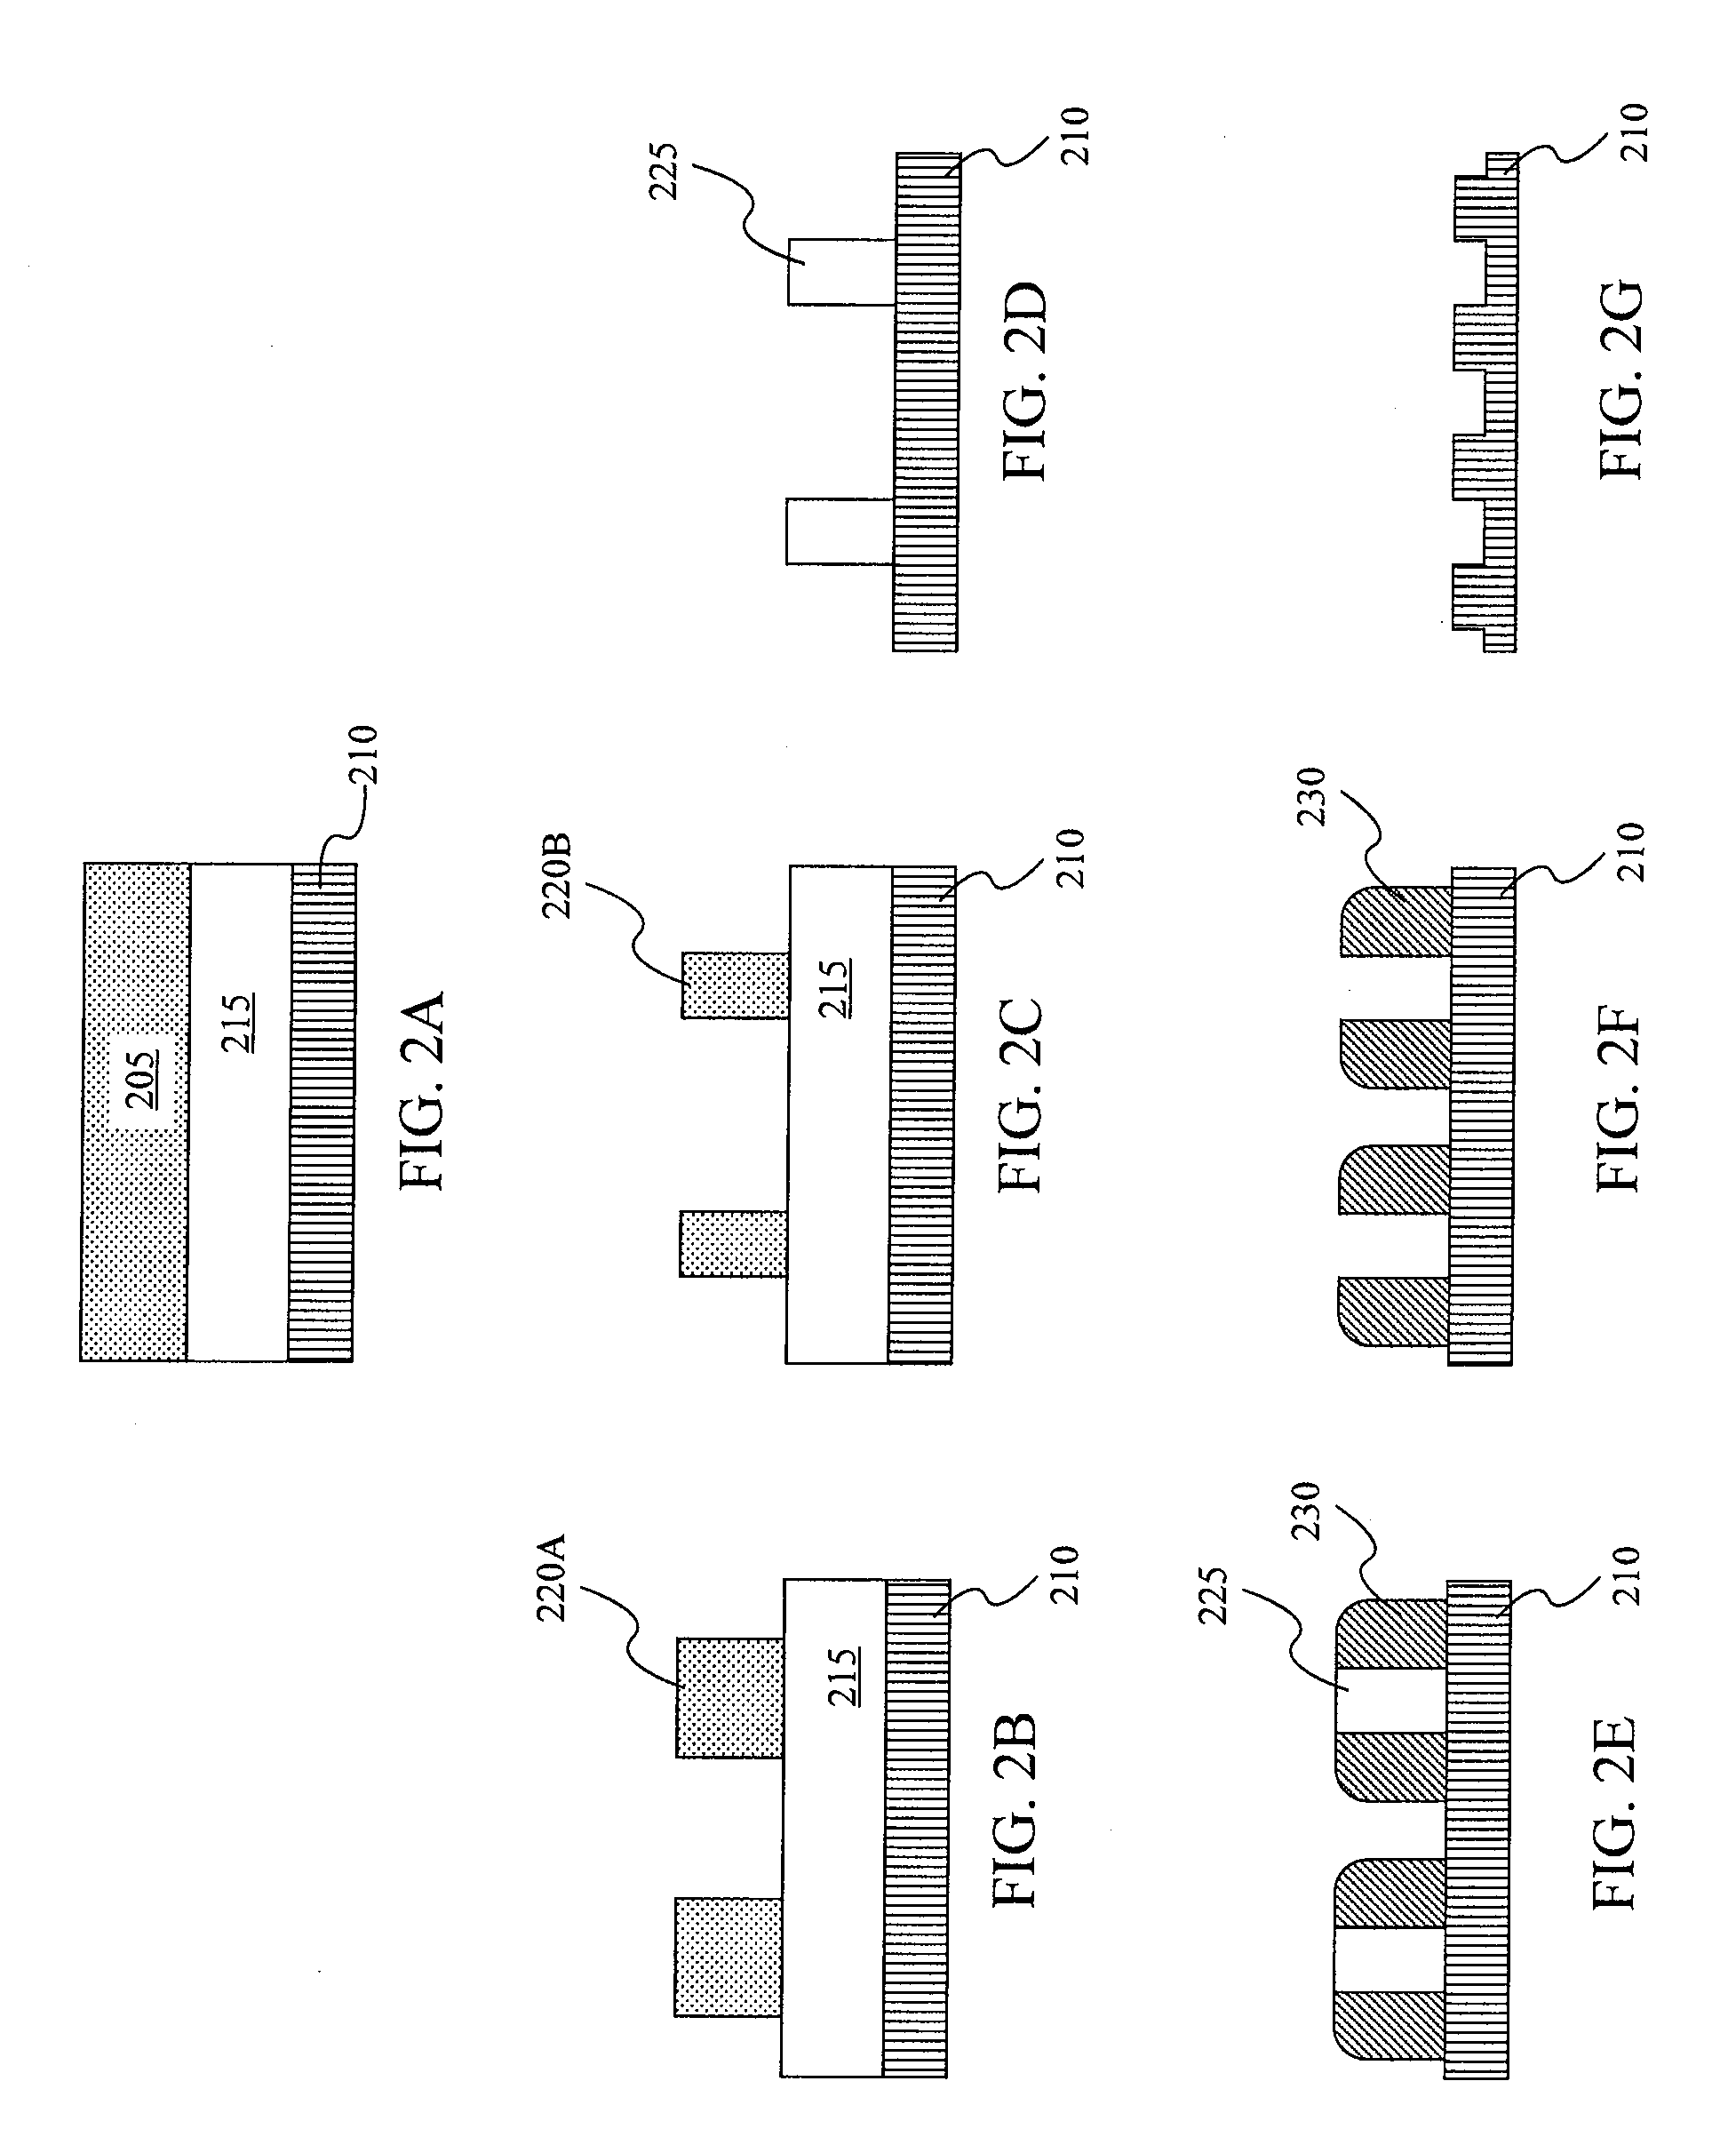 Patterning resolution enhancement combining interference lithography and self-aligned double patterning techniques